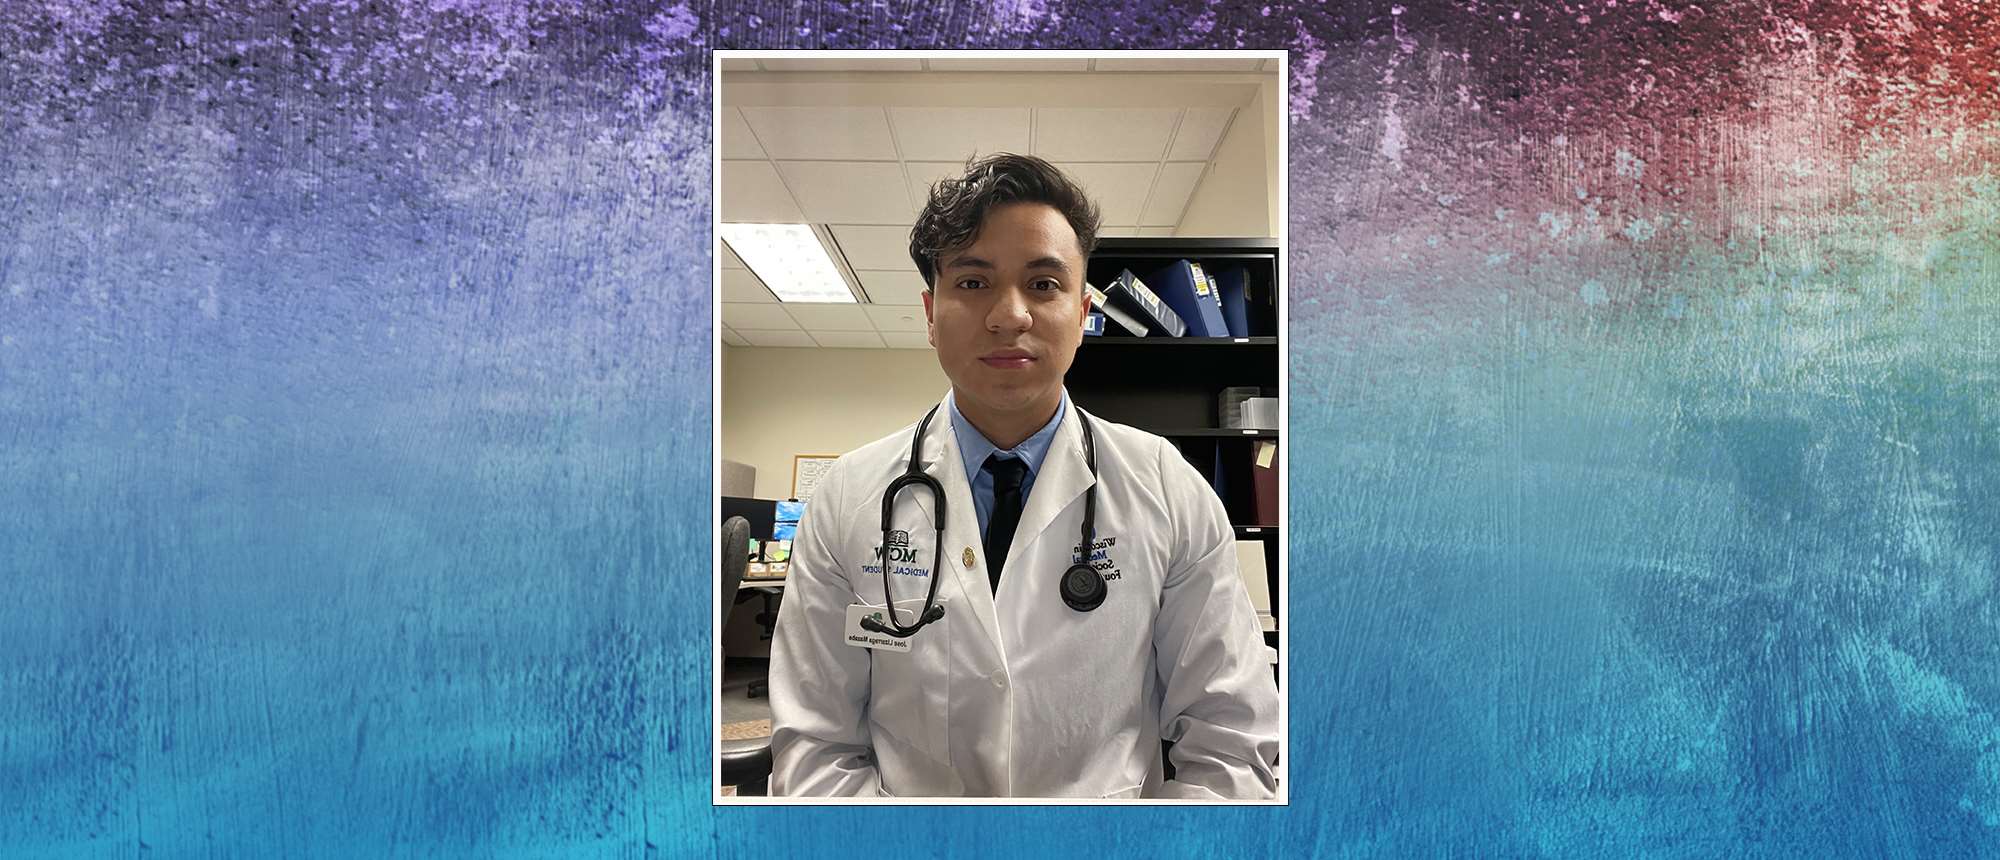 From Dreamer to Doctor: Medical student awarded scholarship